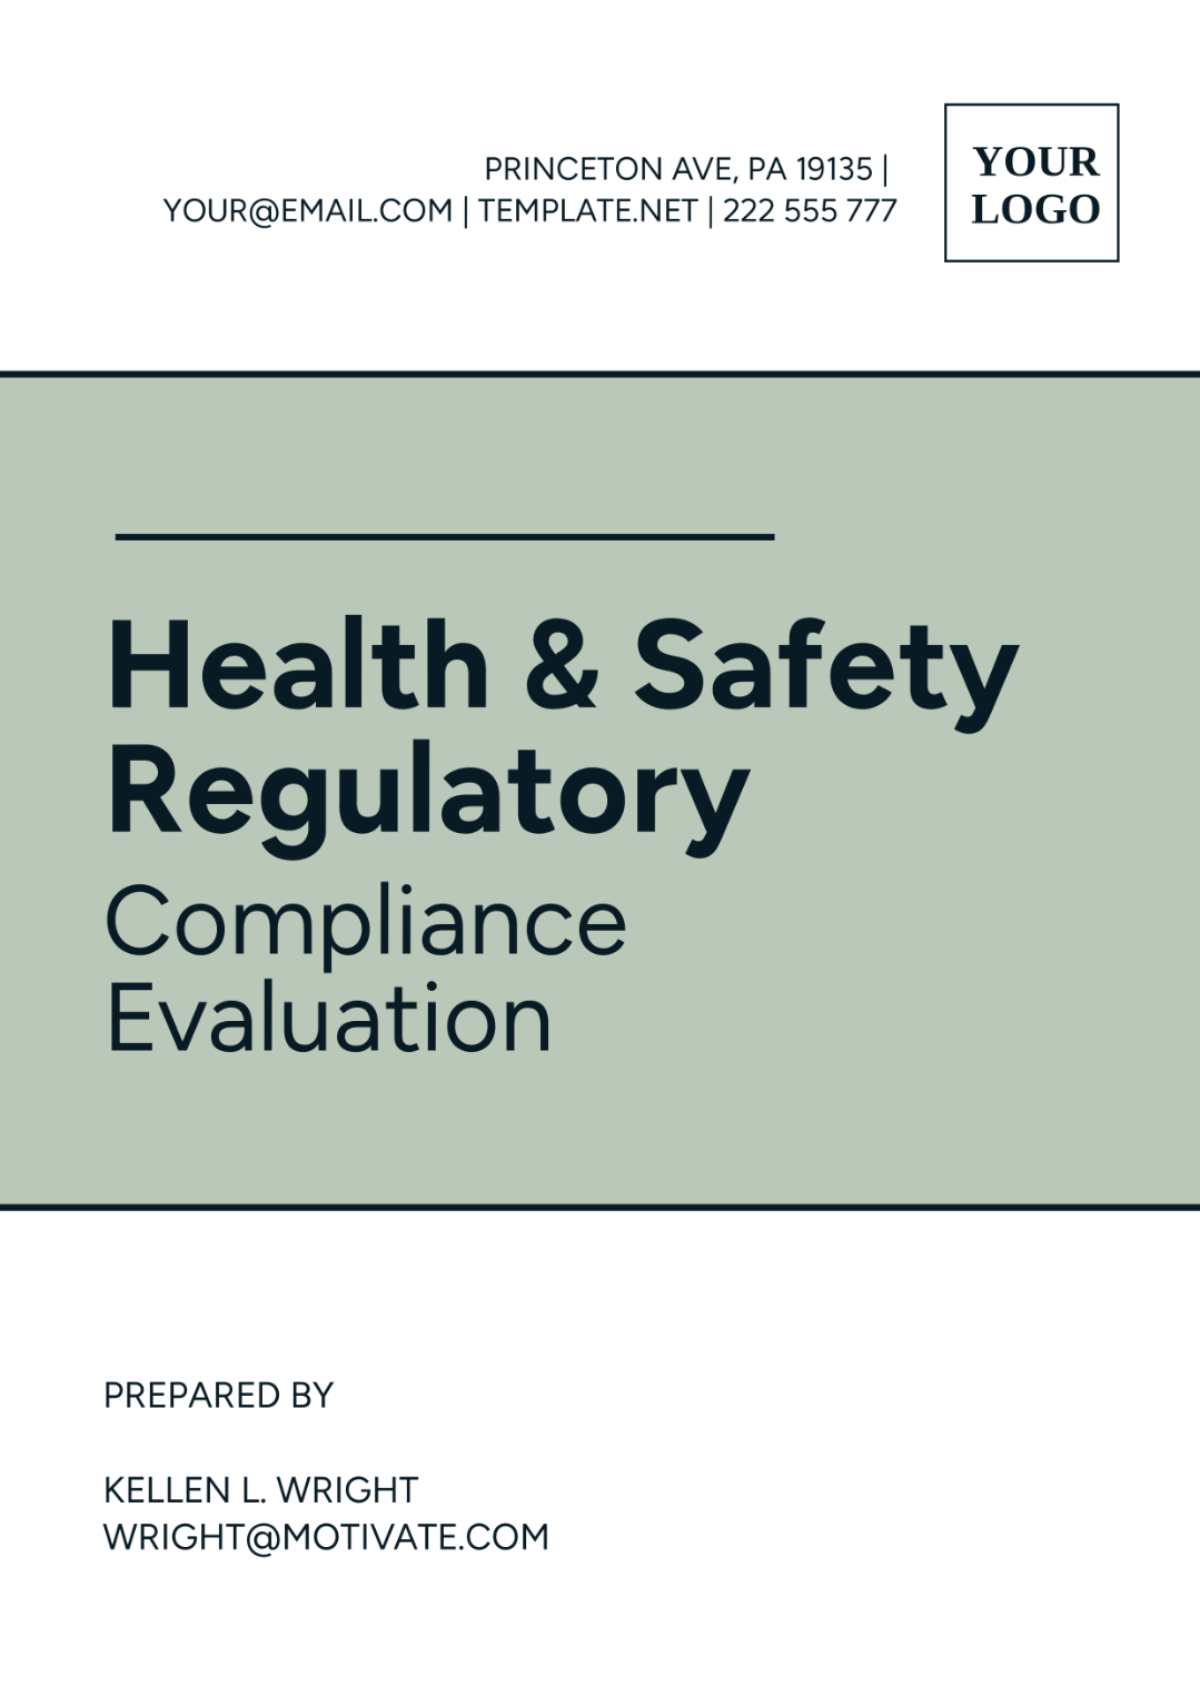 Free Health & Safety Regulatory Compliance Evaluation Template